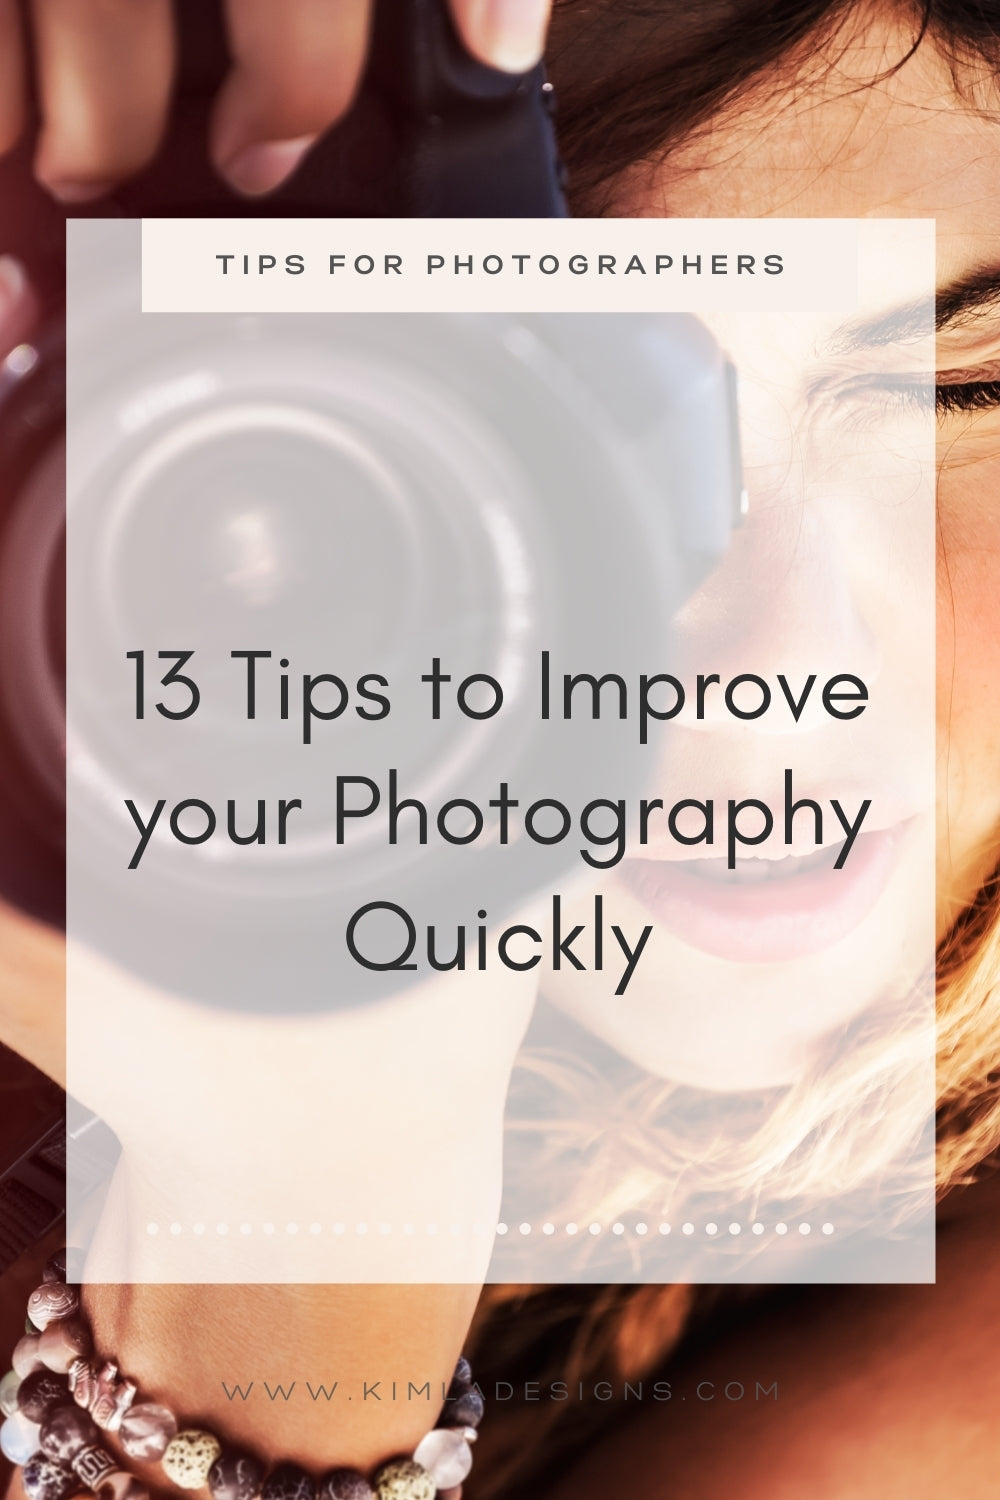 13 Tips to Improve your Photography Quickly